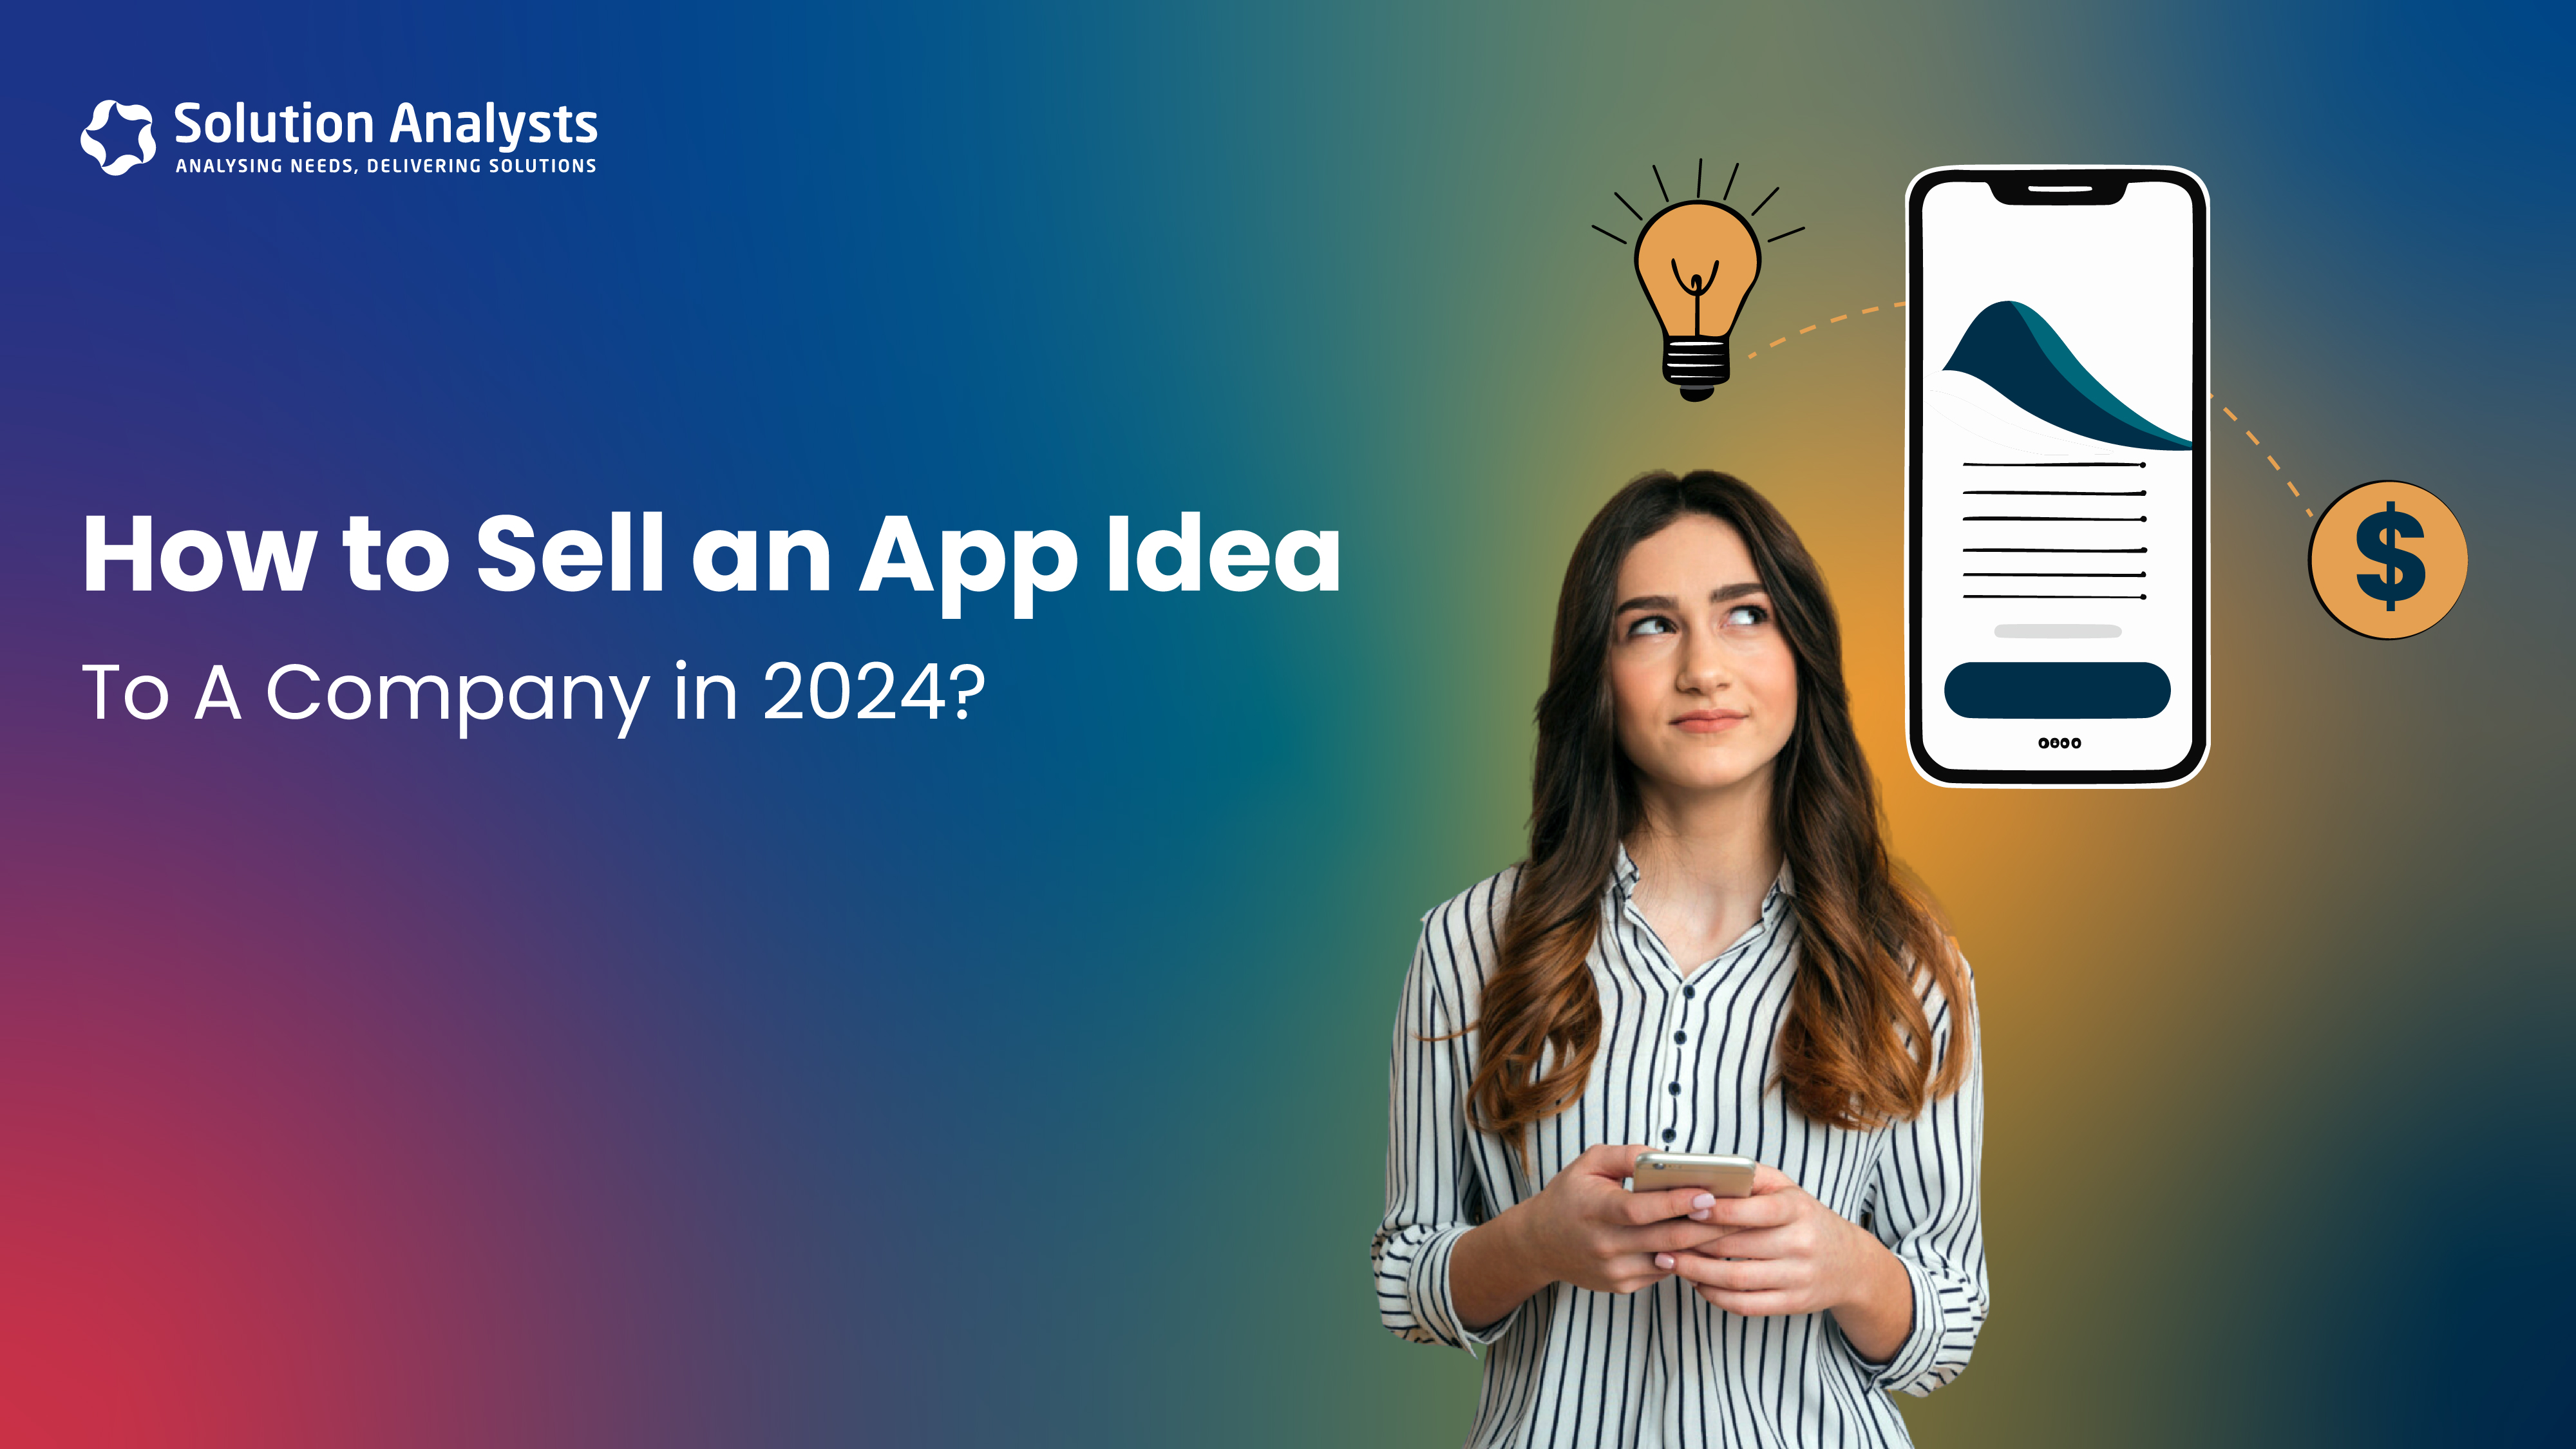 How to Sell an App Idea To A Company in 2024?